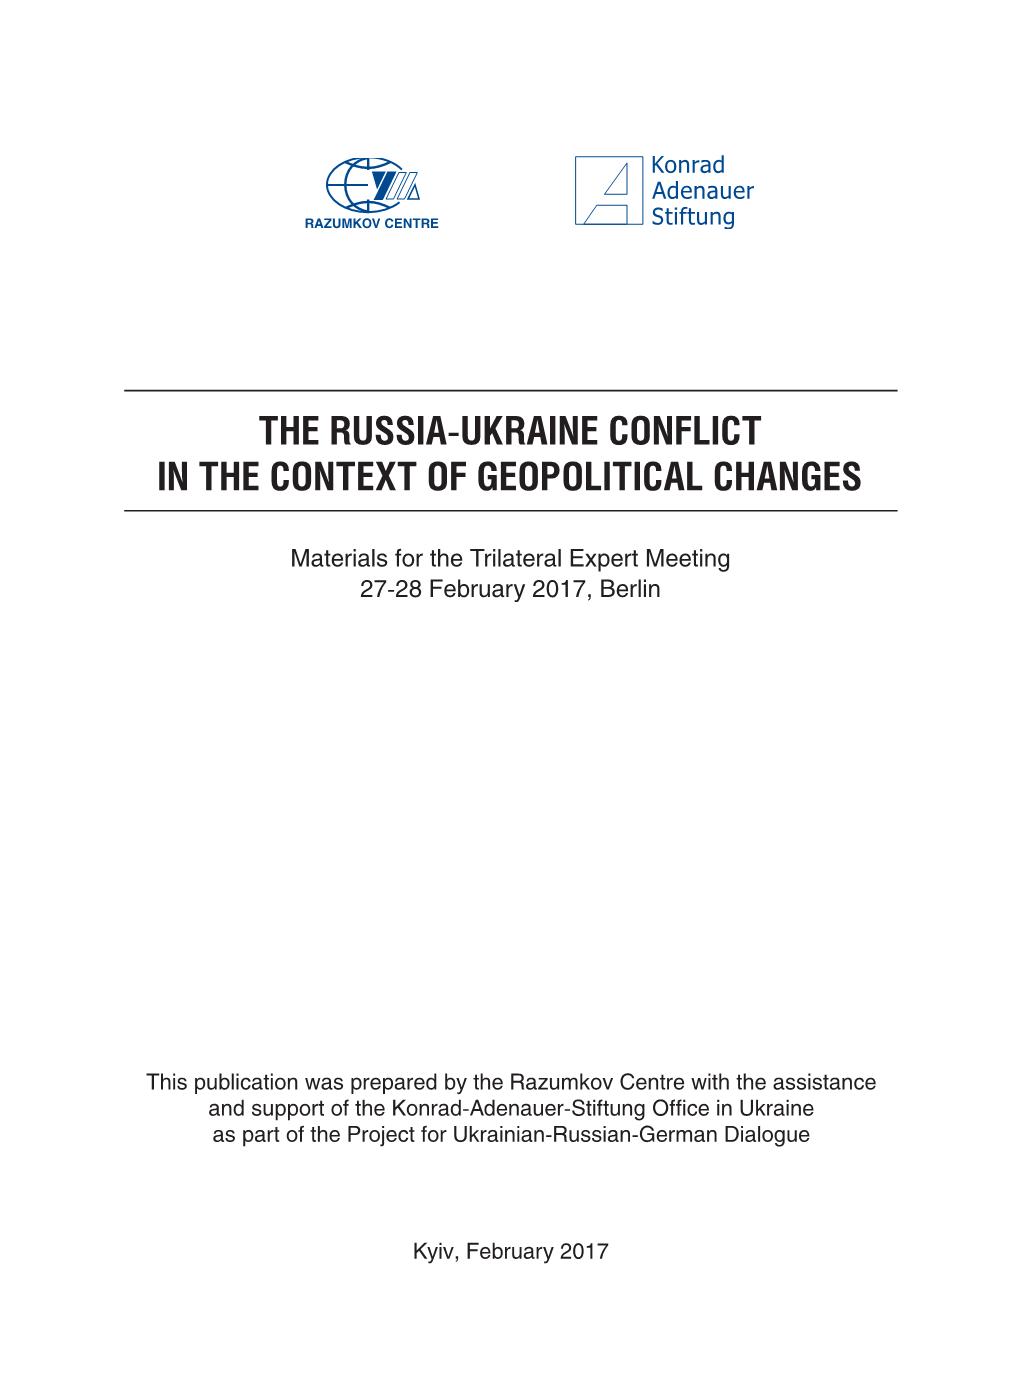 The Russia-Ukraine Conflict in the Context of Geopolitical Changes